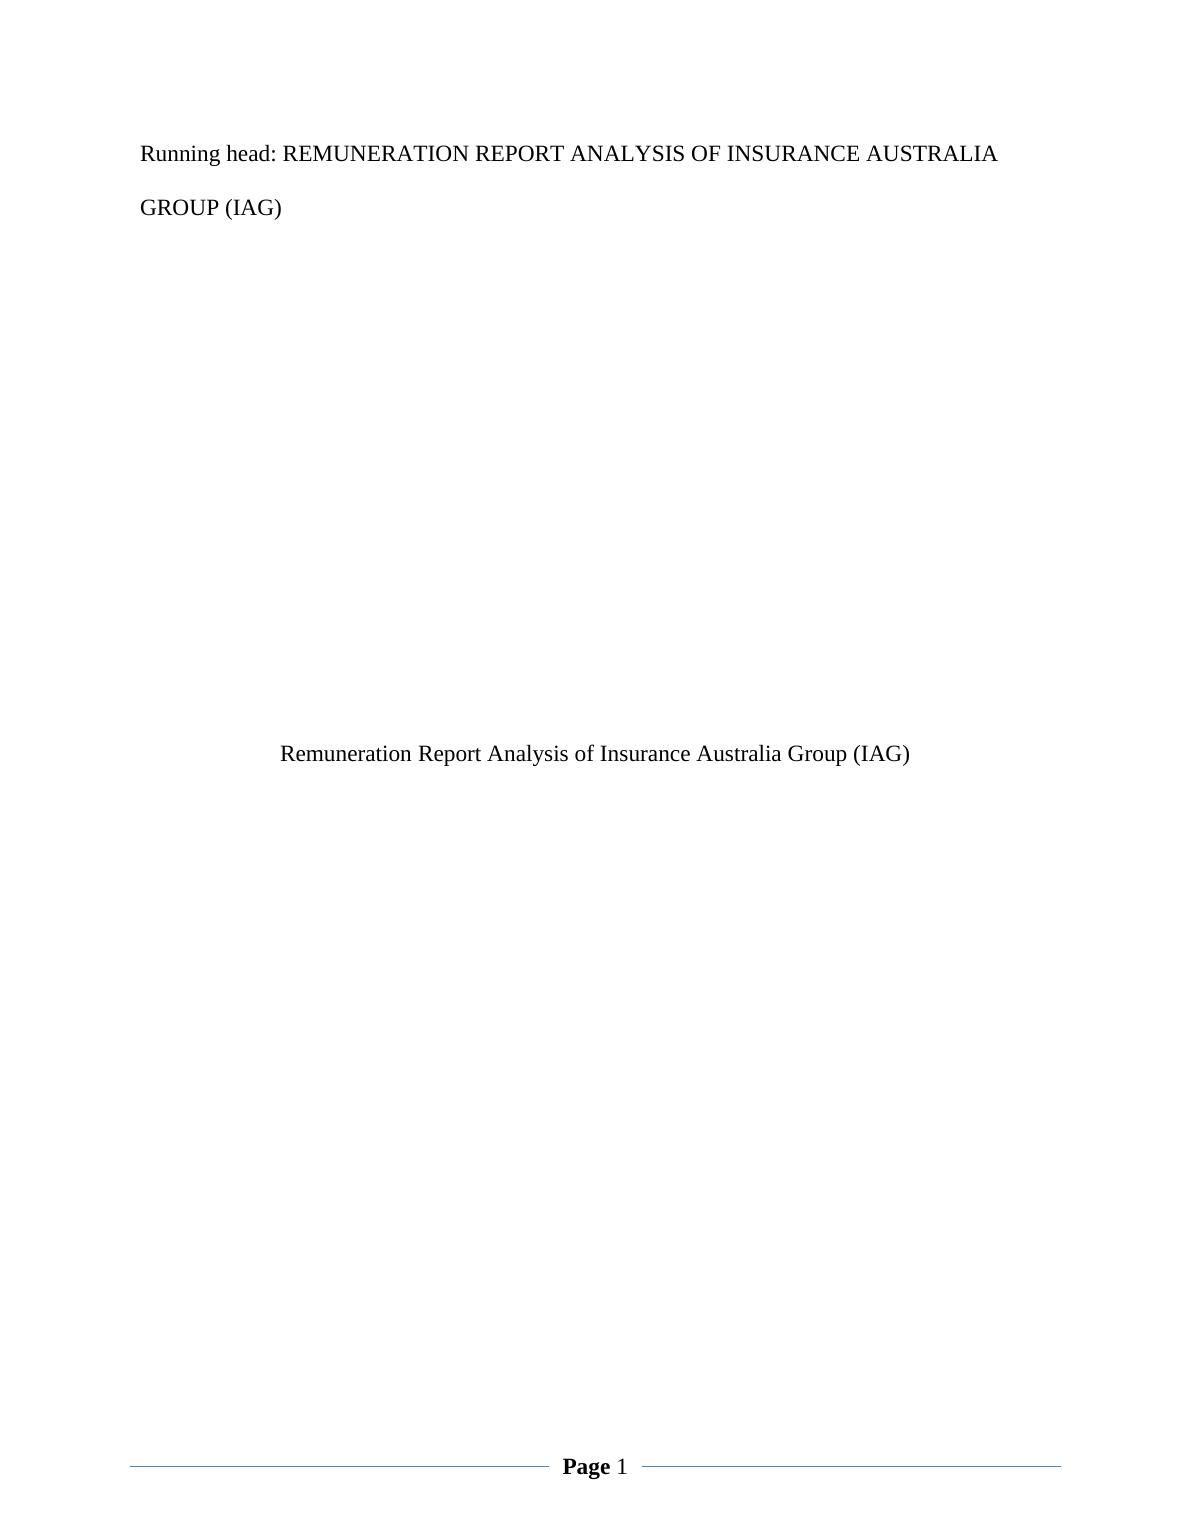 Remuneration Report Analysis of Insurance Australia Group Limited (IAG)_1